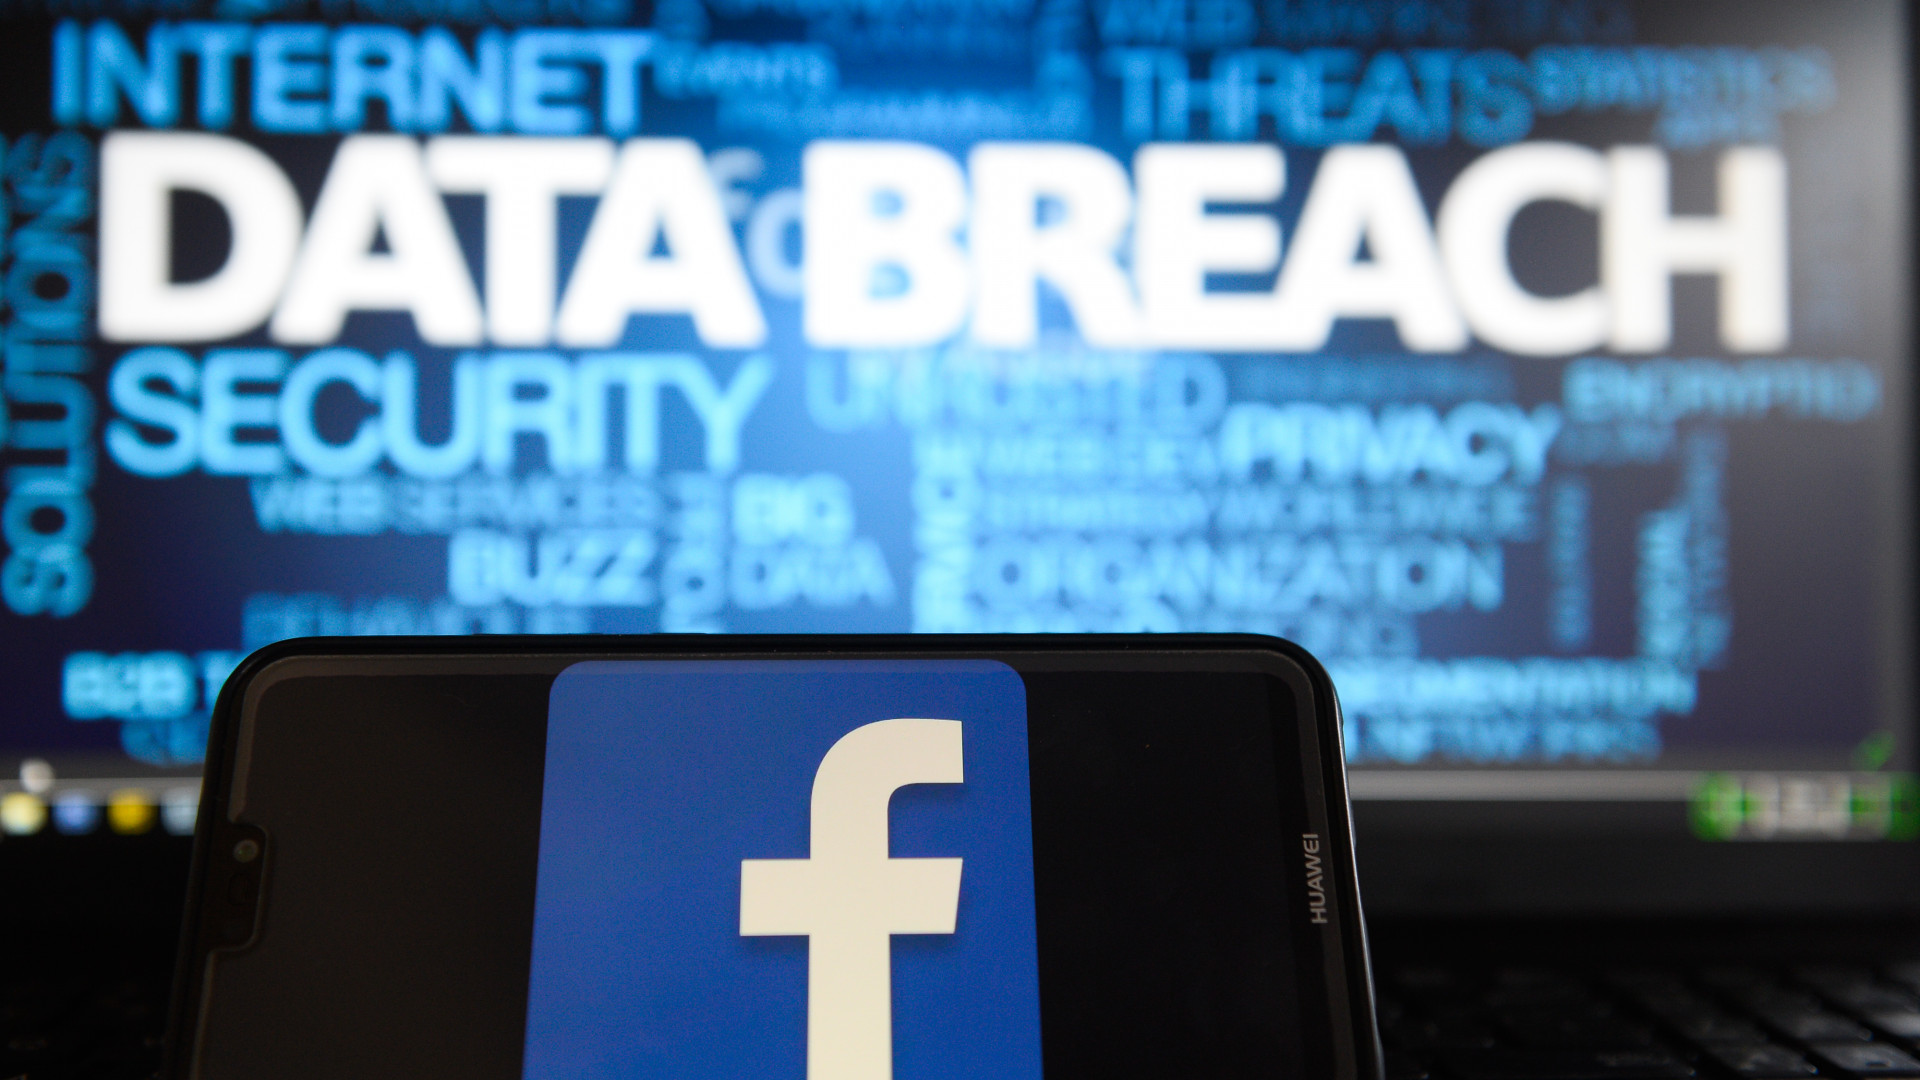 More than half a billion Facebook users' data has been leaked, and an unprecedented class action lawsuit could come